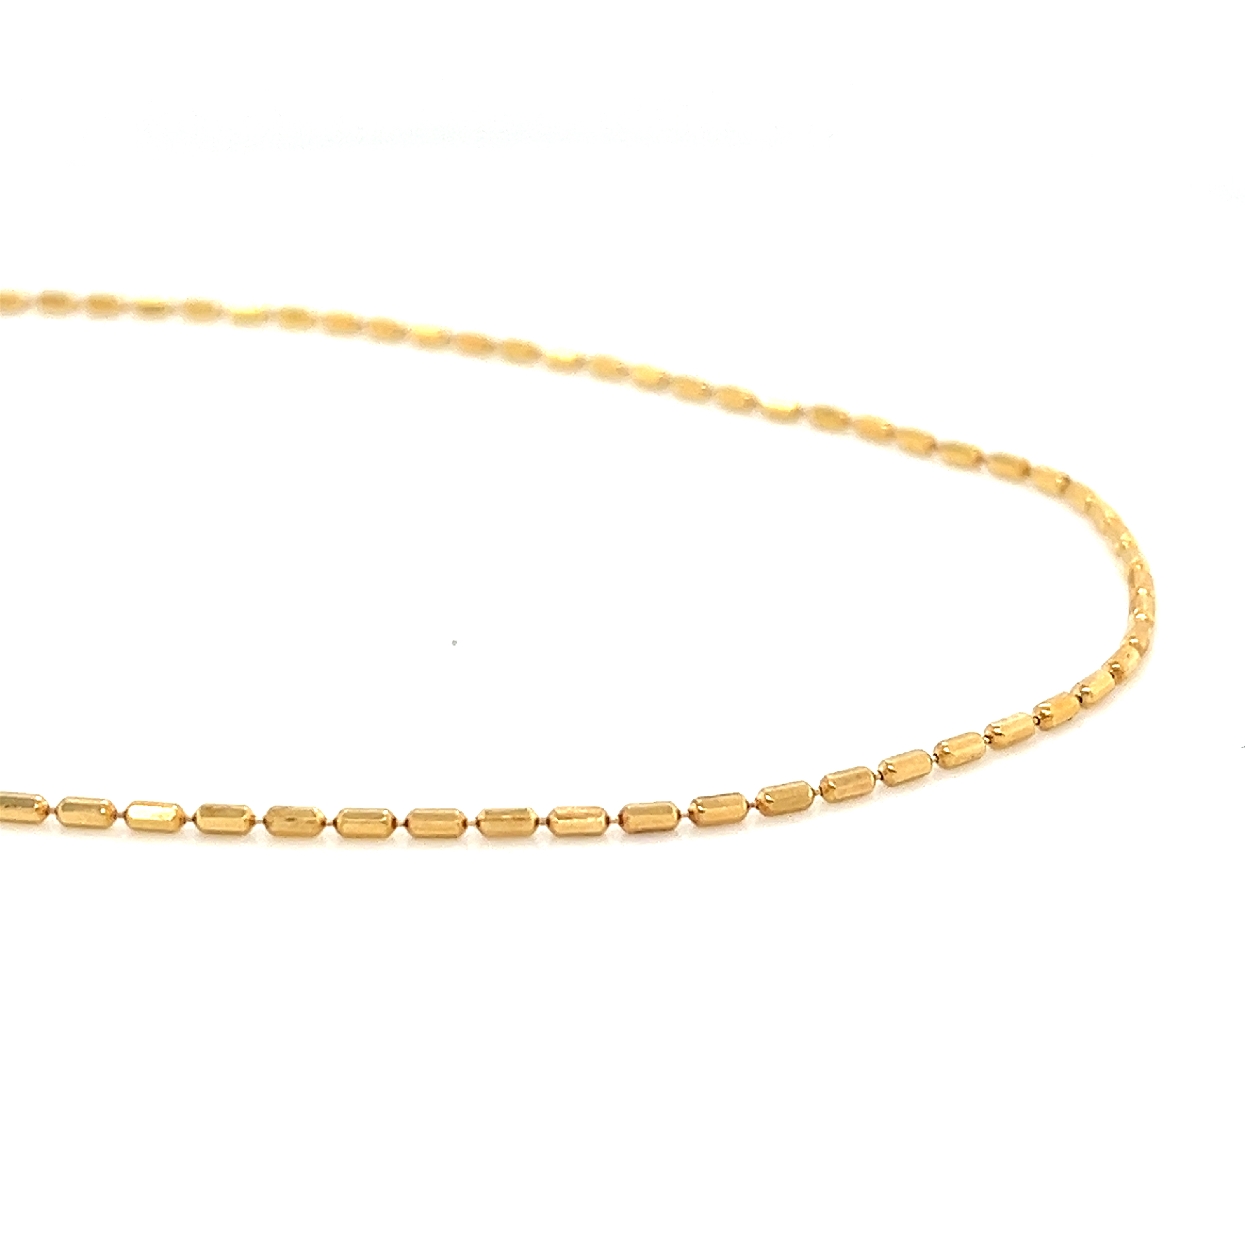 14kt yellow gold 22 inch bead link chain